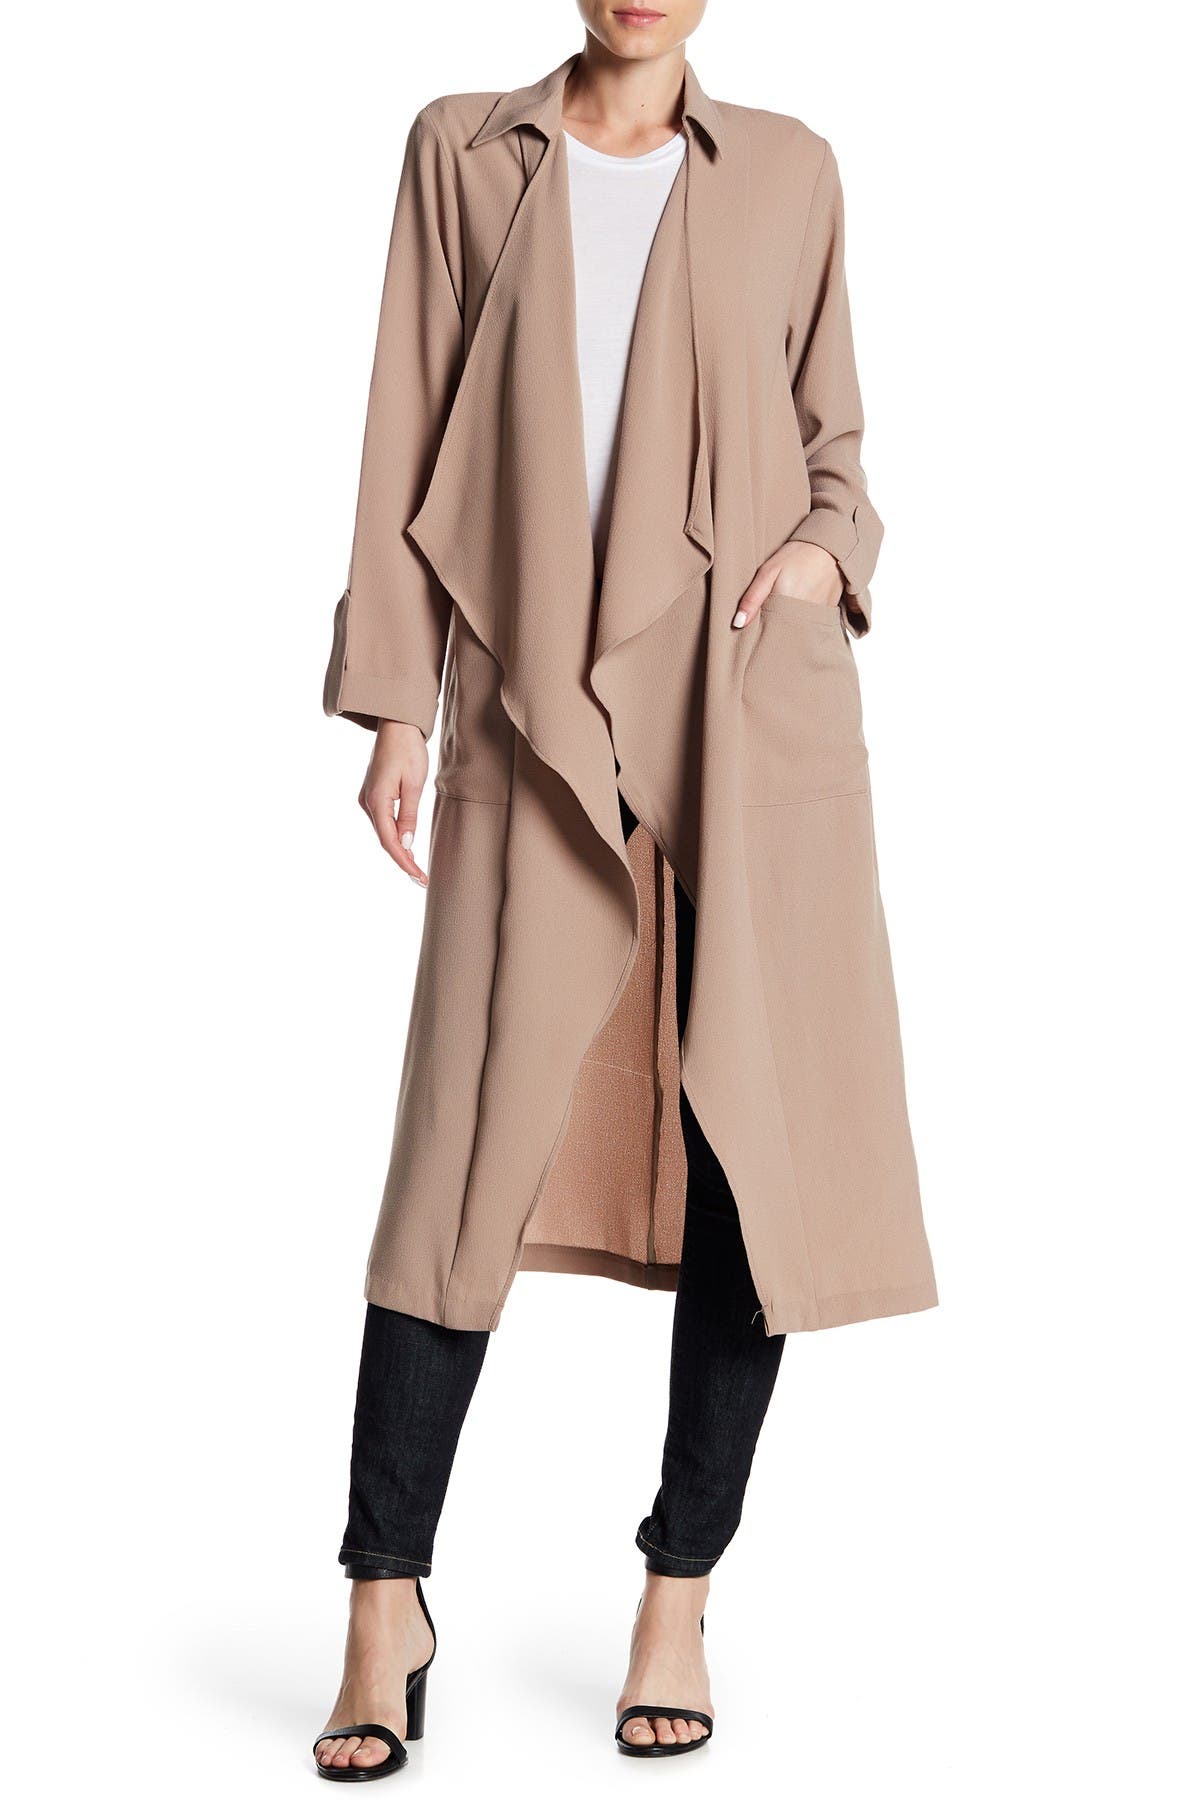 Lush | Draped Open Front Trench Duster | Nordstrom Rack